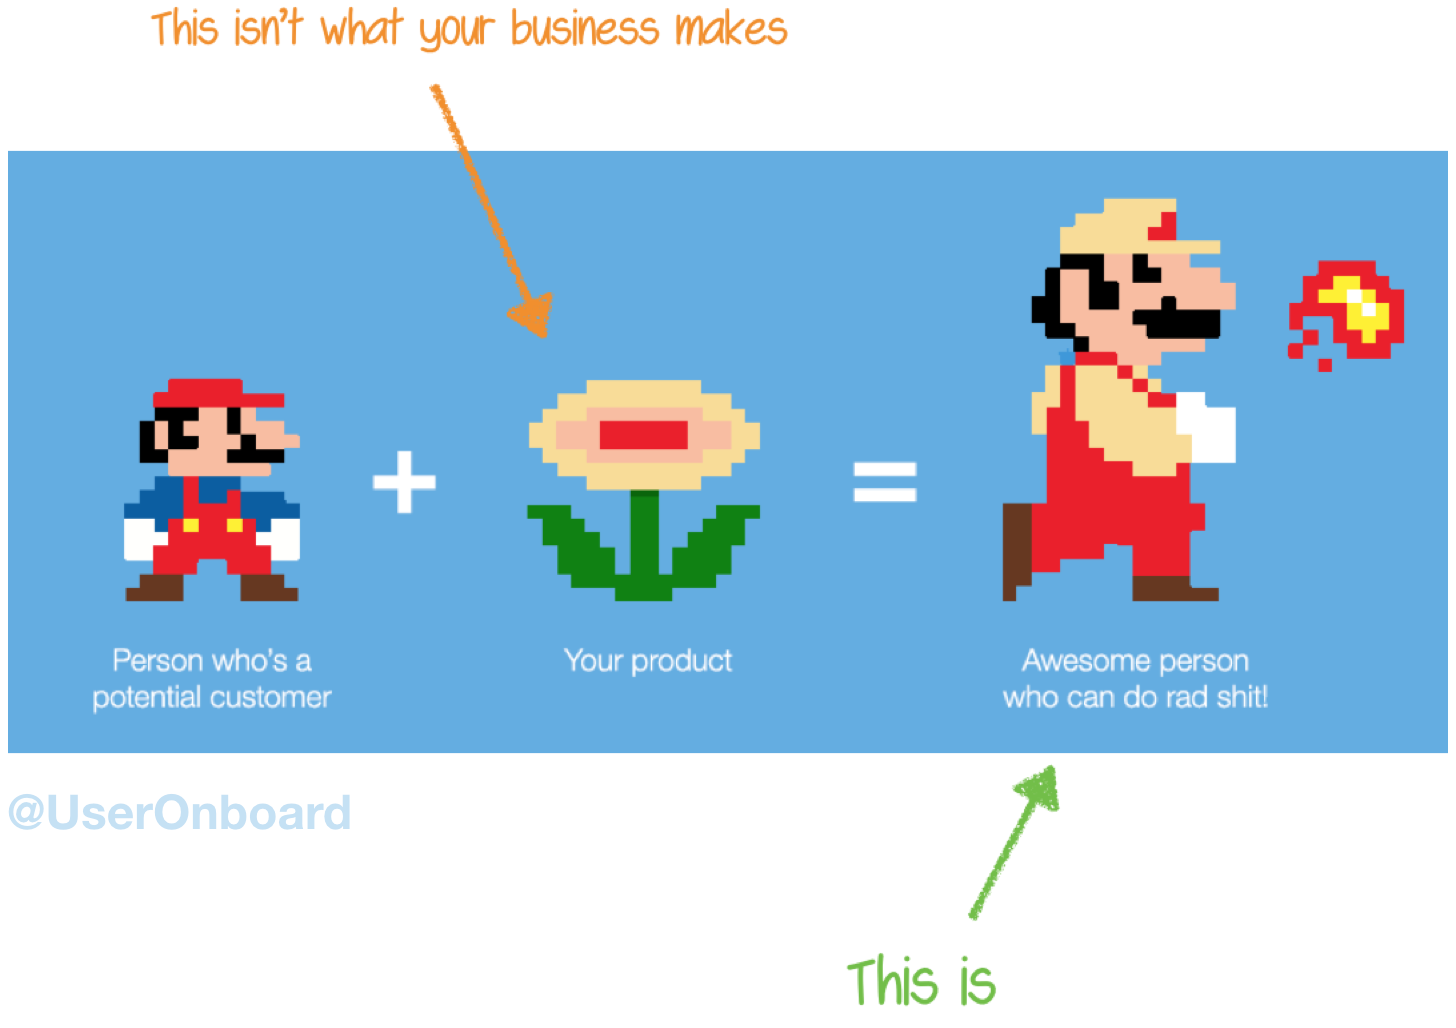 An image of Super Mario Bros. to visualize the concept of onboarding